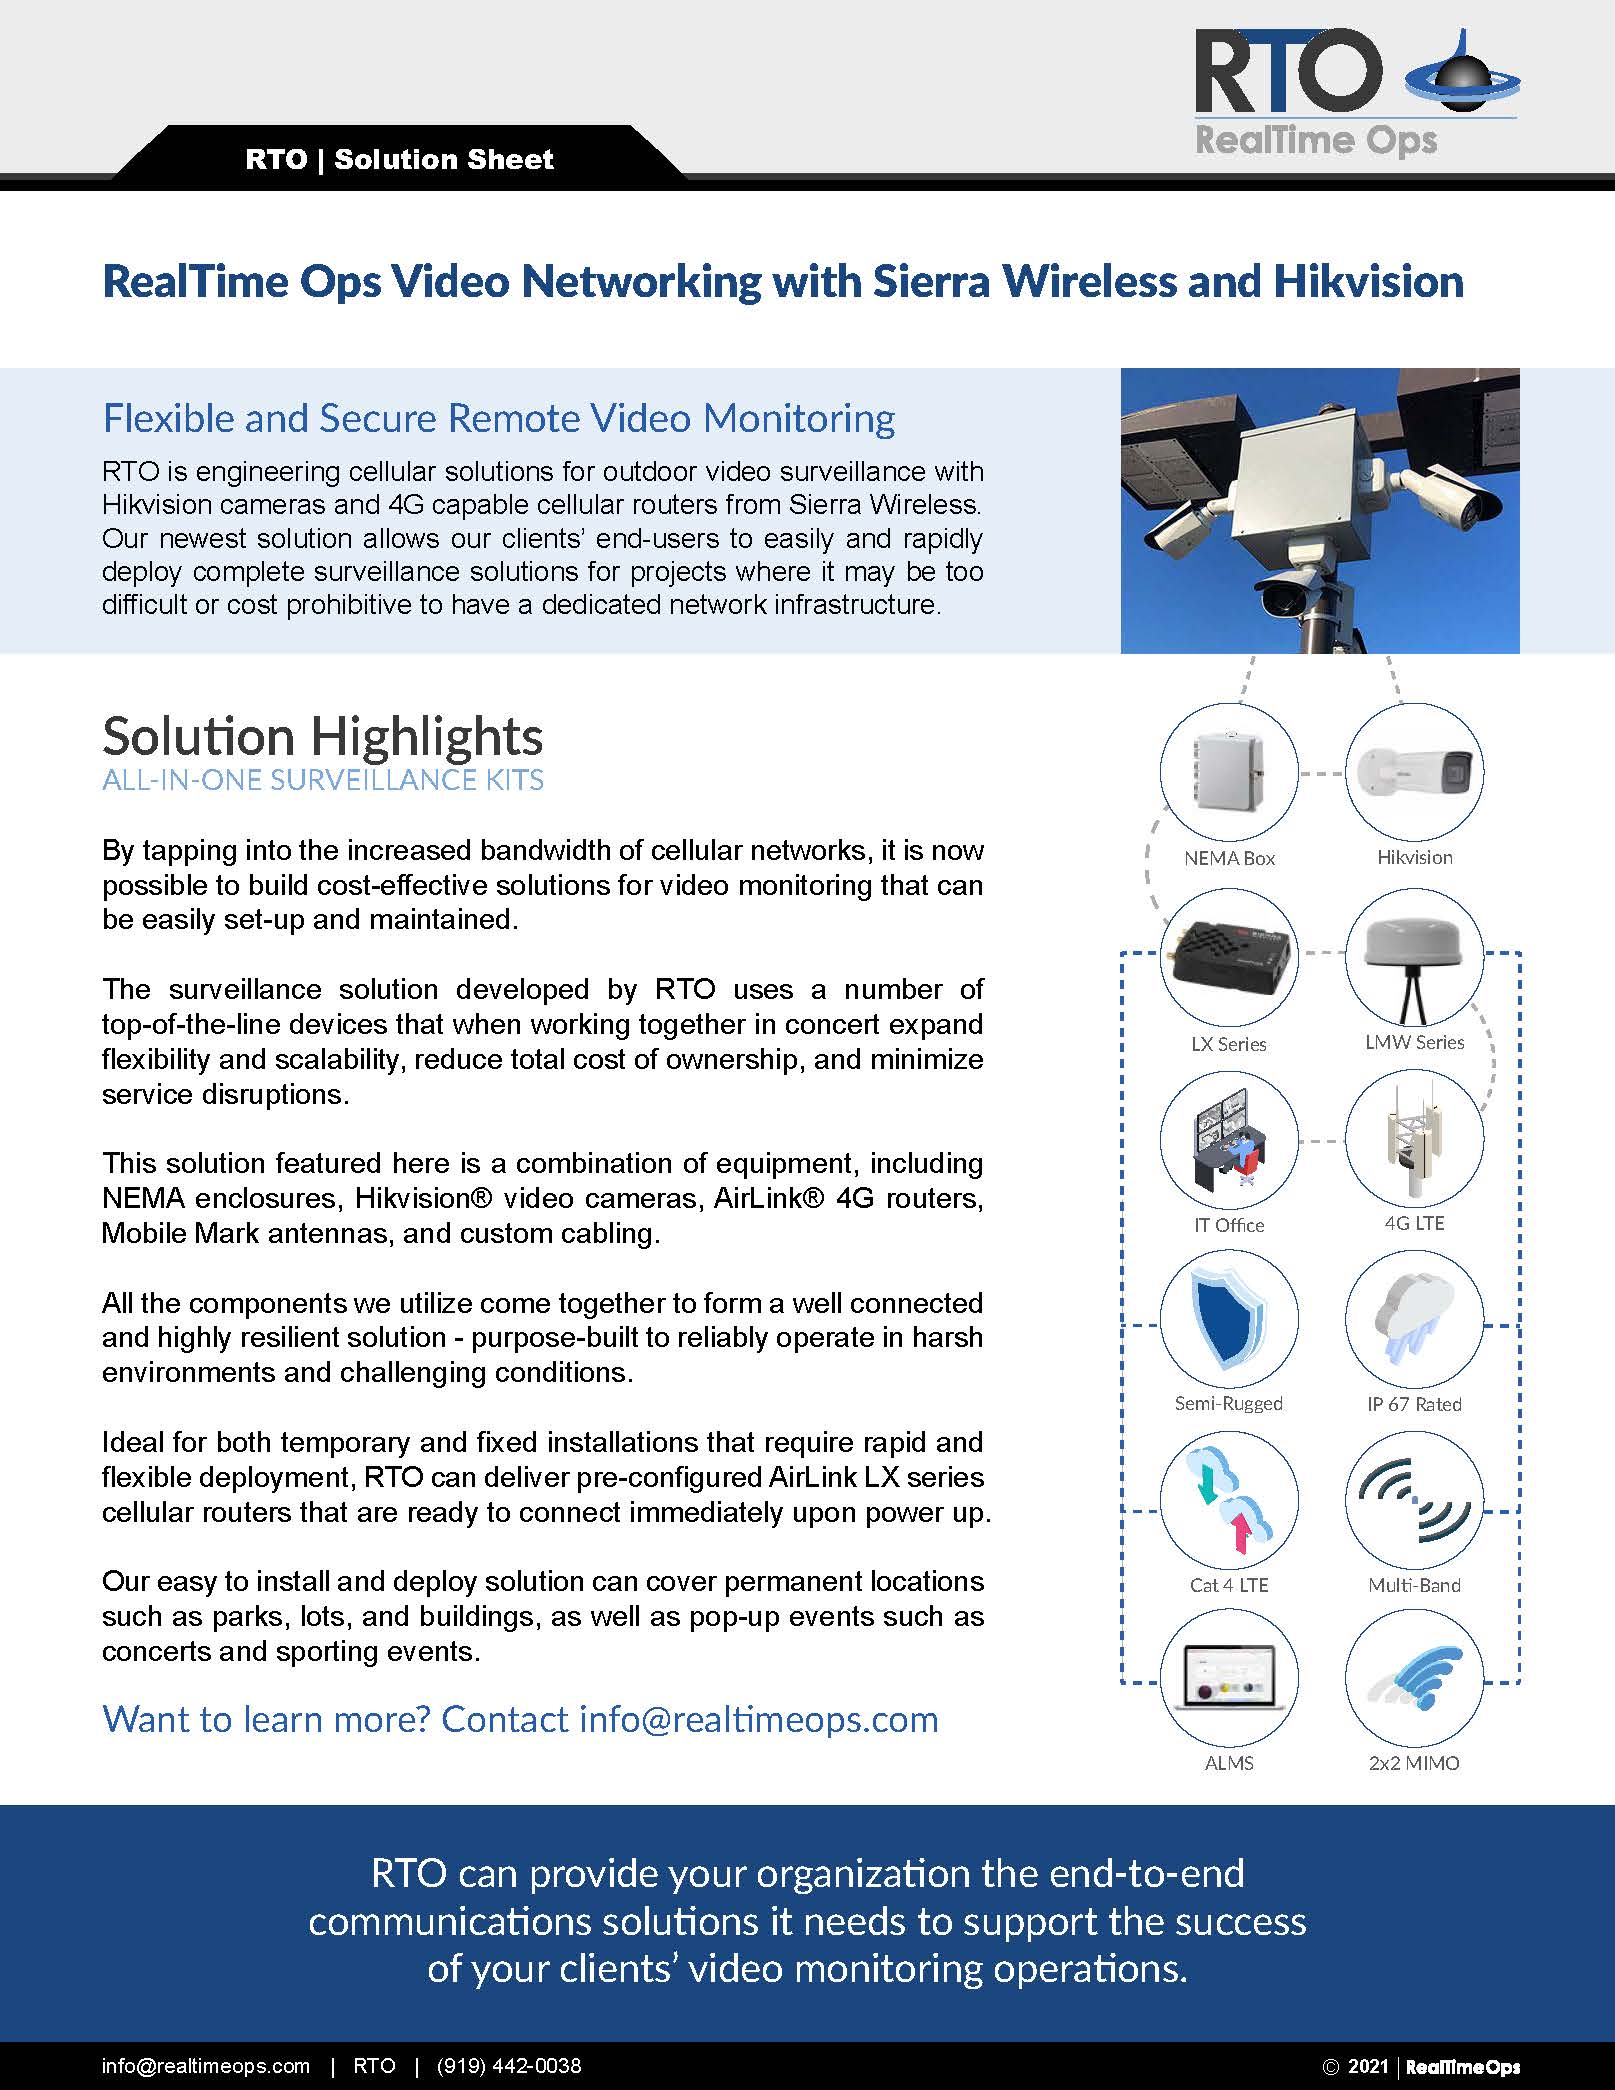 Video Security with Cellular Networks